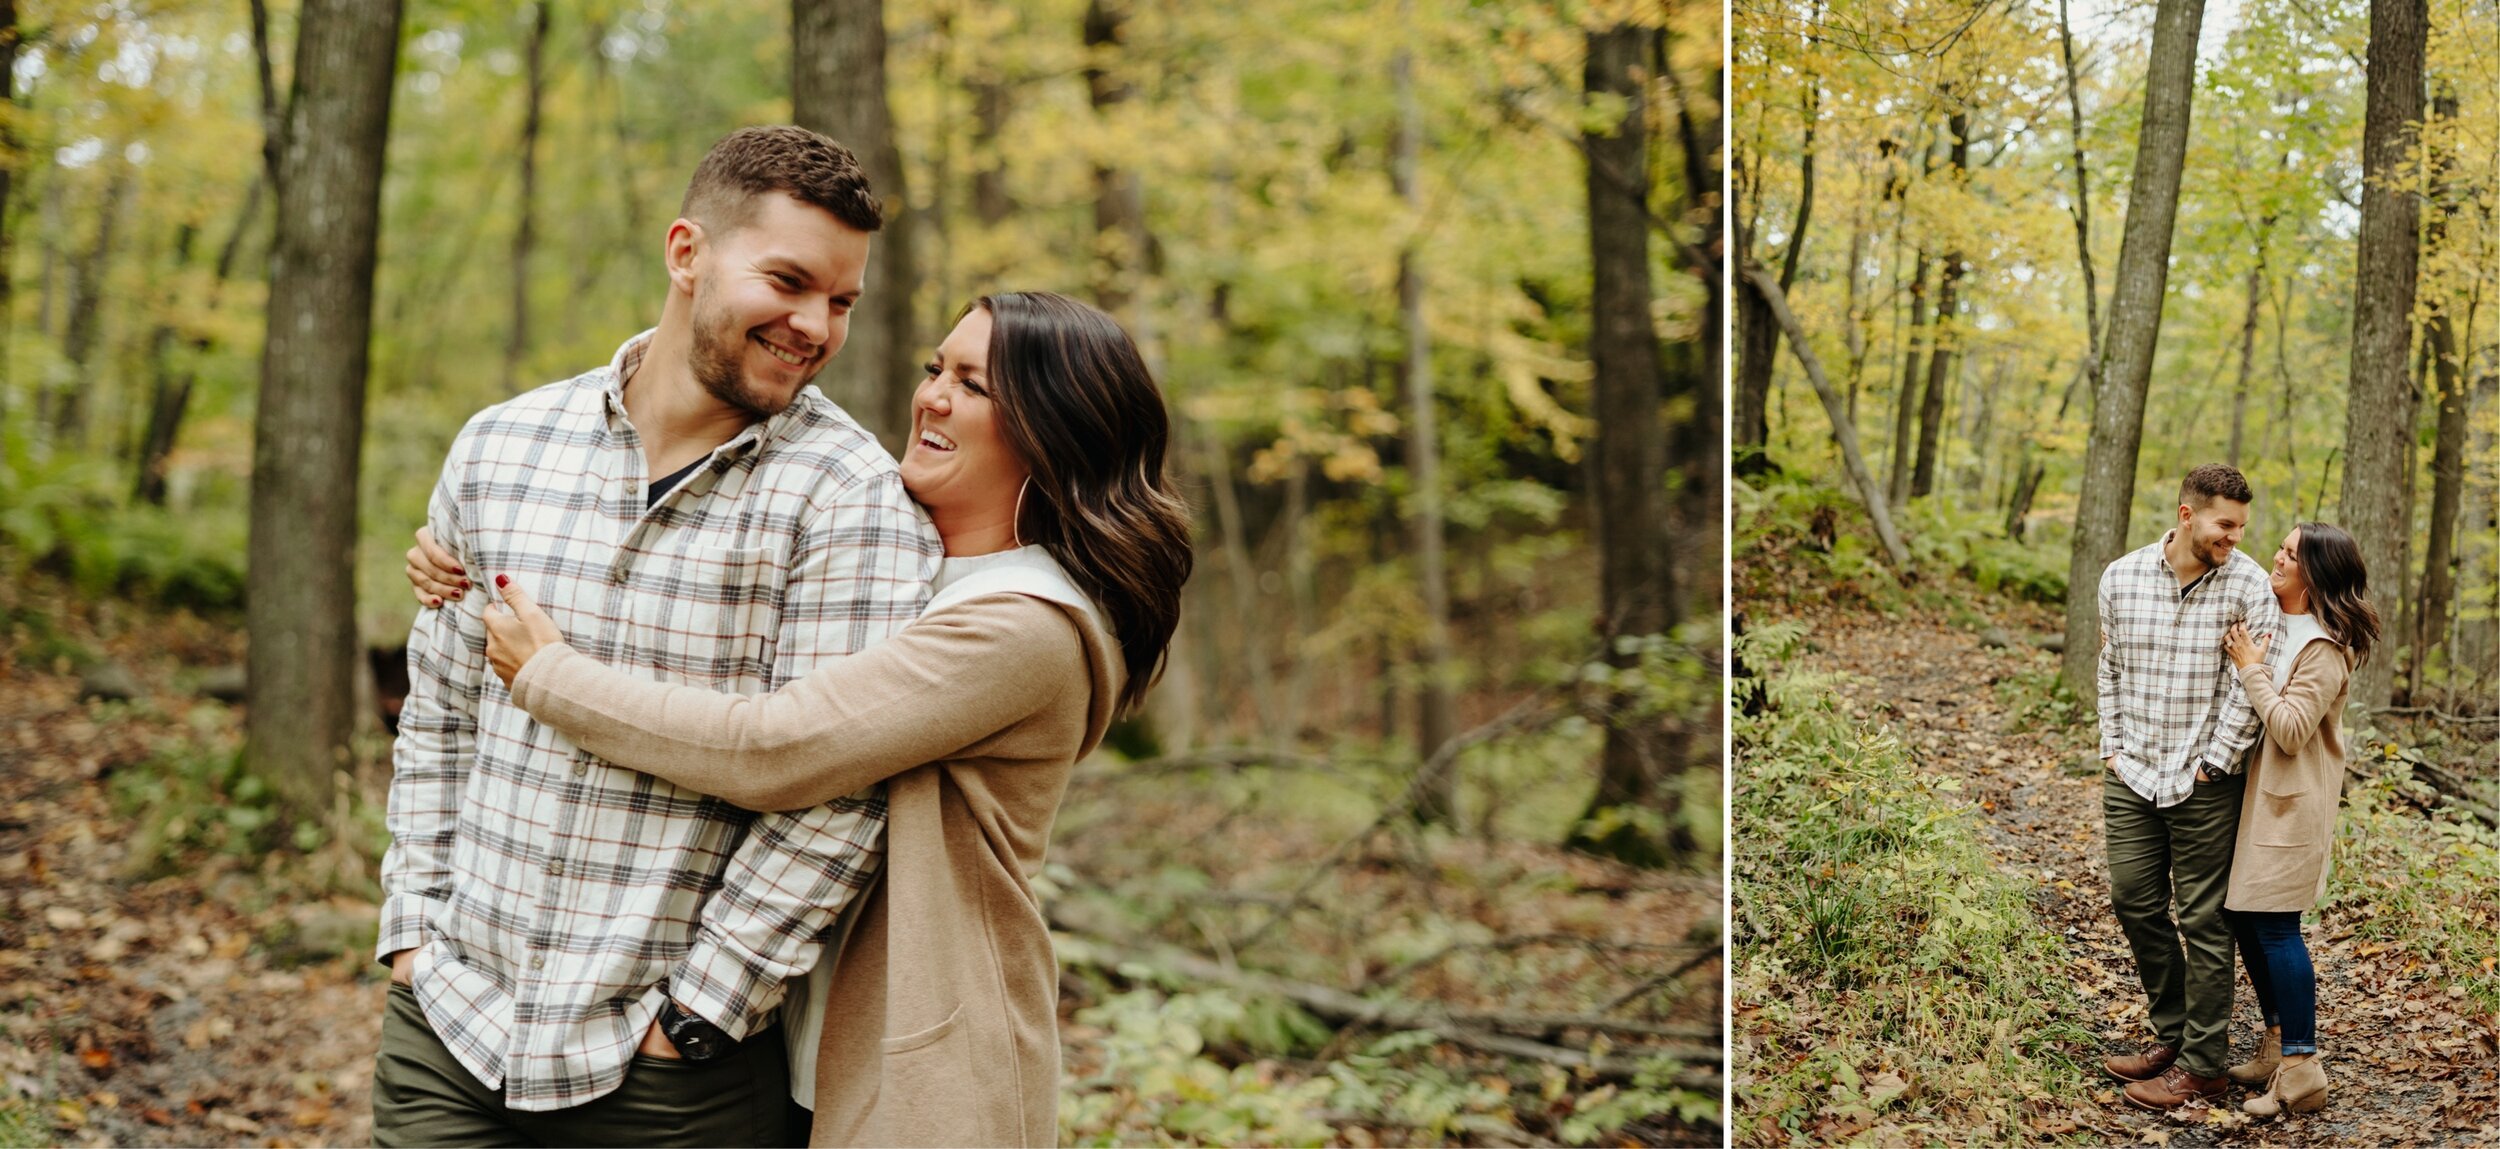 18_taylors-falls-engagement-session-interstate-park-mckenzie-josh-37_taylors-falls-engagement-session-interstate-park-mckenzie-josh-34.jpg